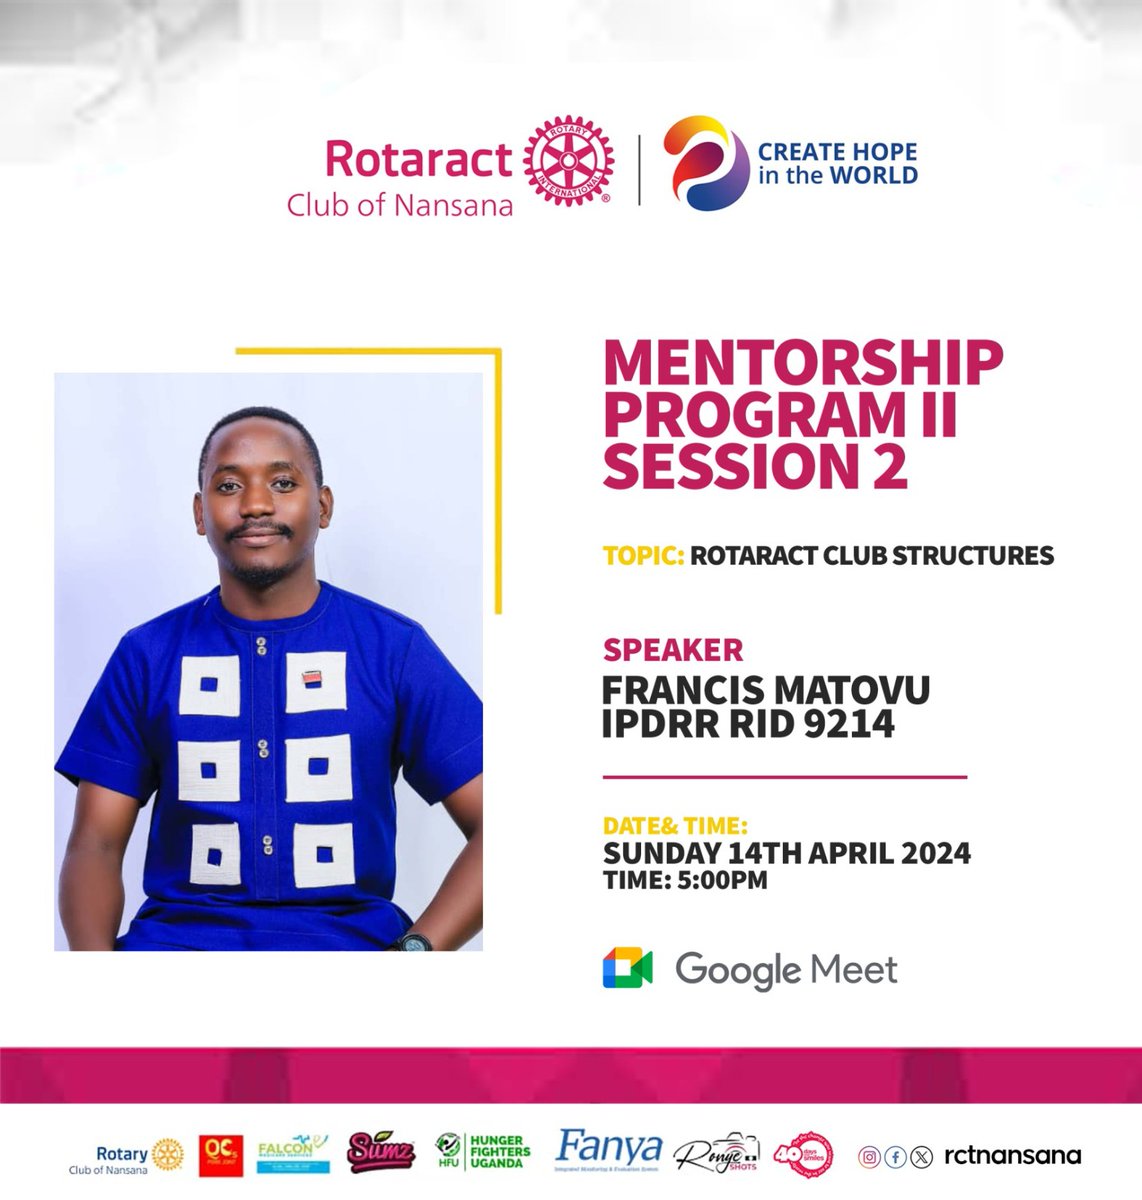 'Excited to join @rctnansana tomorrow for Session 2 of the Mentorship Program II! Looking forward to sharing insights on Rotaract club structures and empowering the next generation of leaders. See you there!'